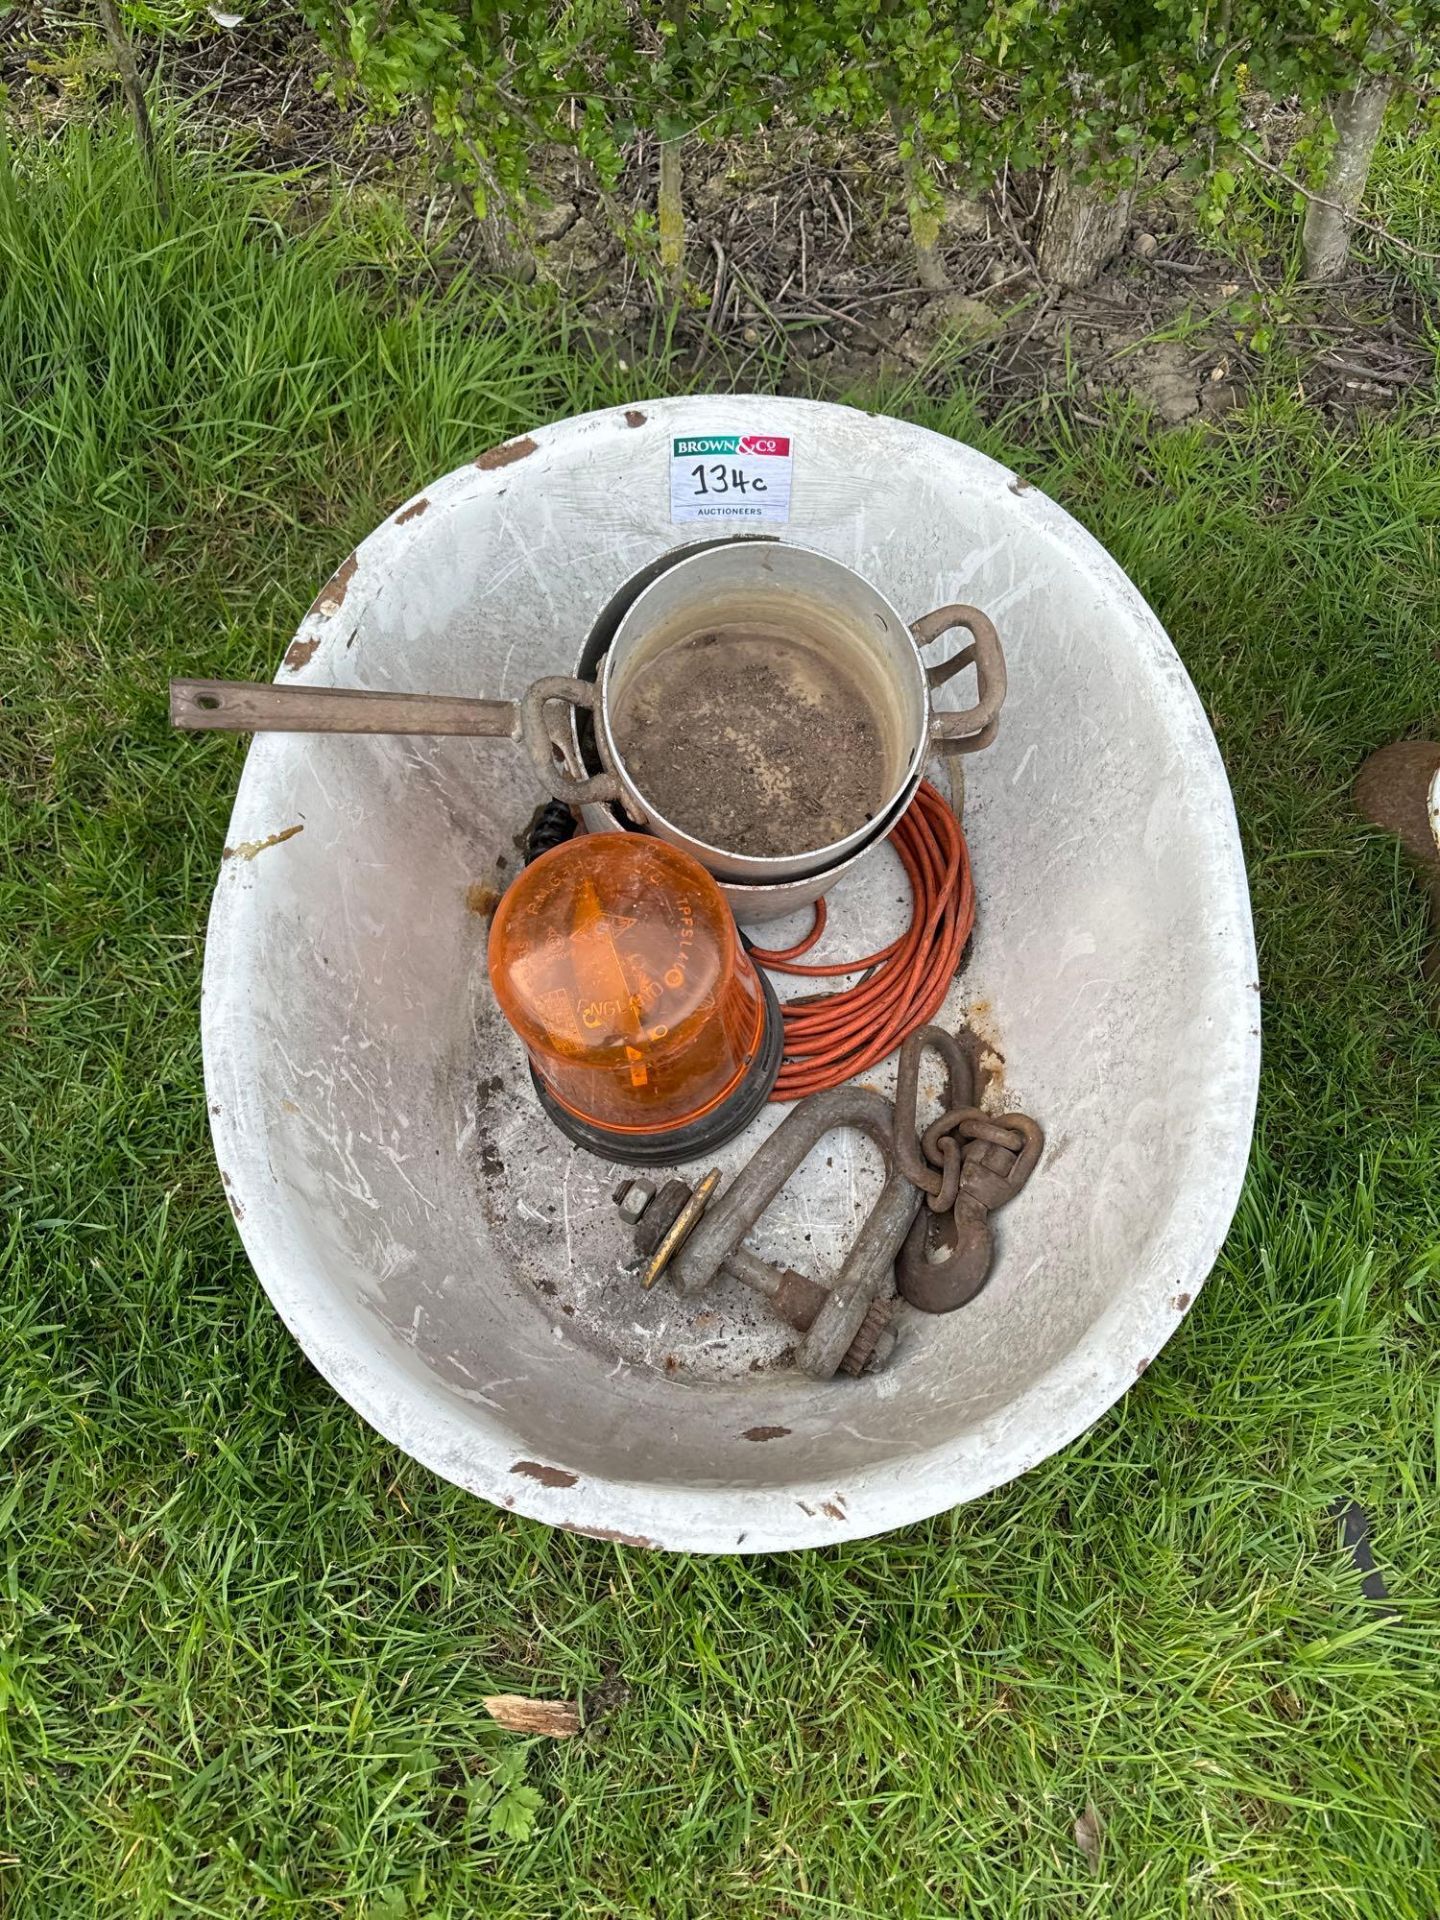 Metal tub and contents